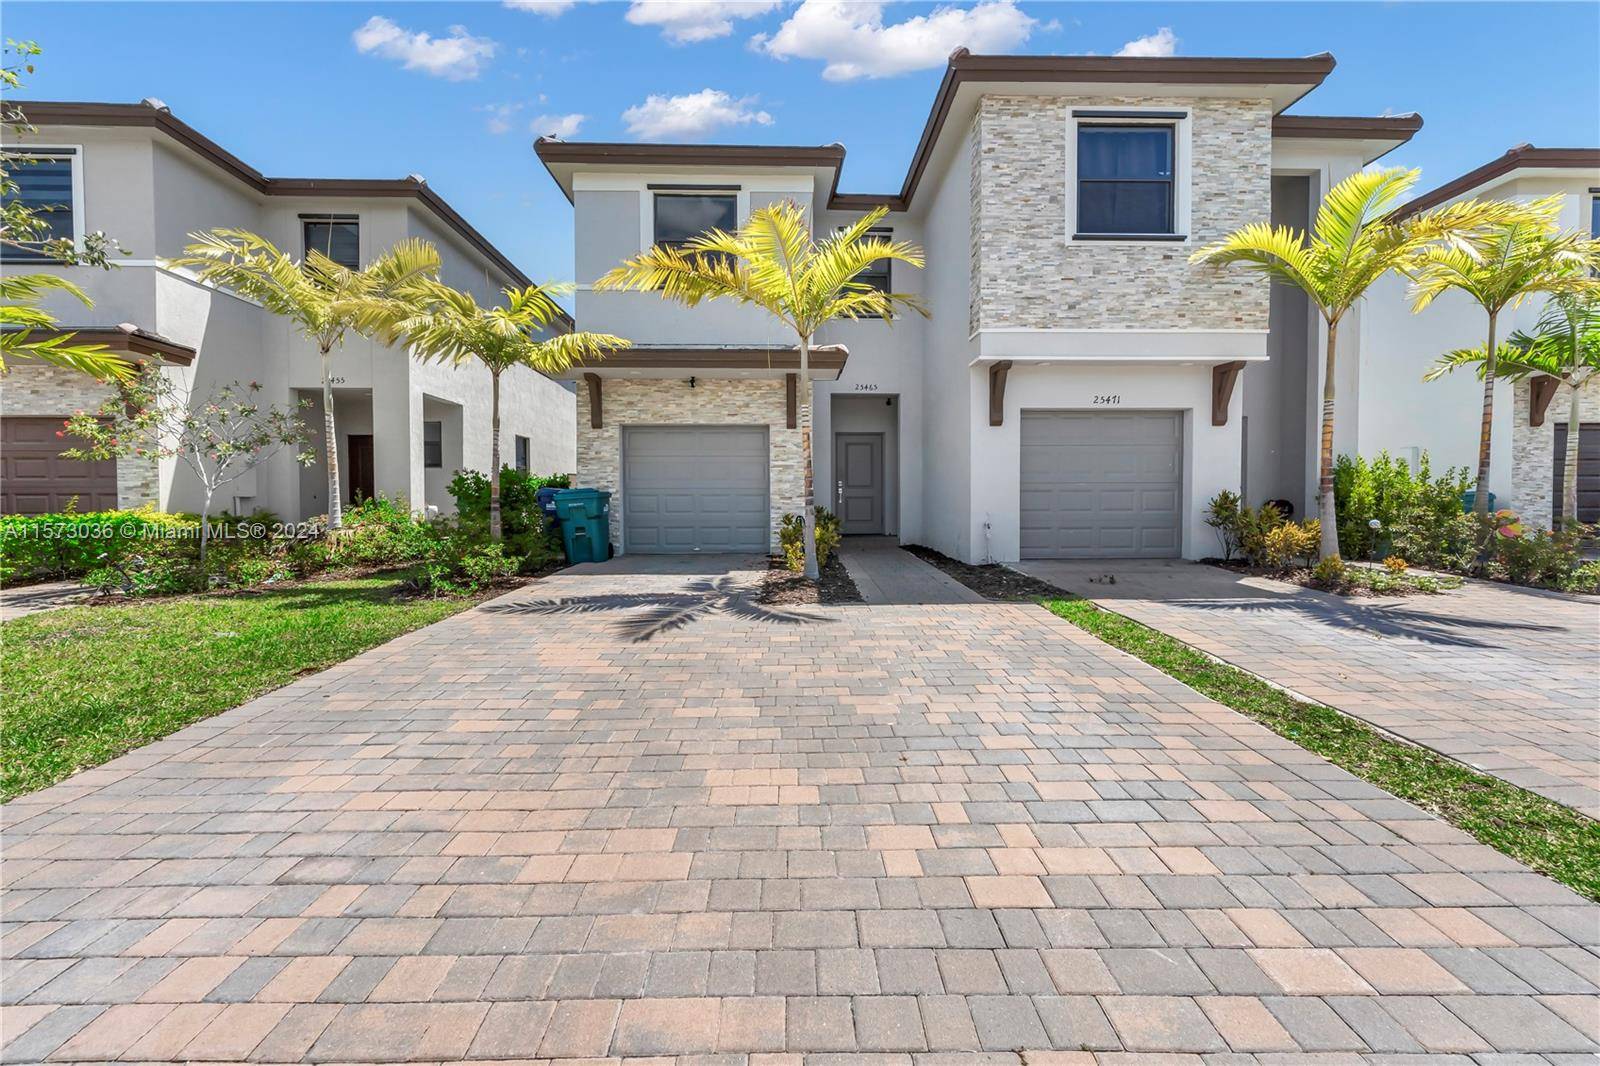 Welcome to your future oasis in the heart of the Campo Bello neighborhood of Lennar !